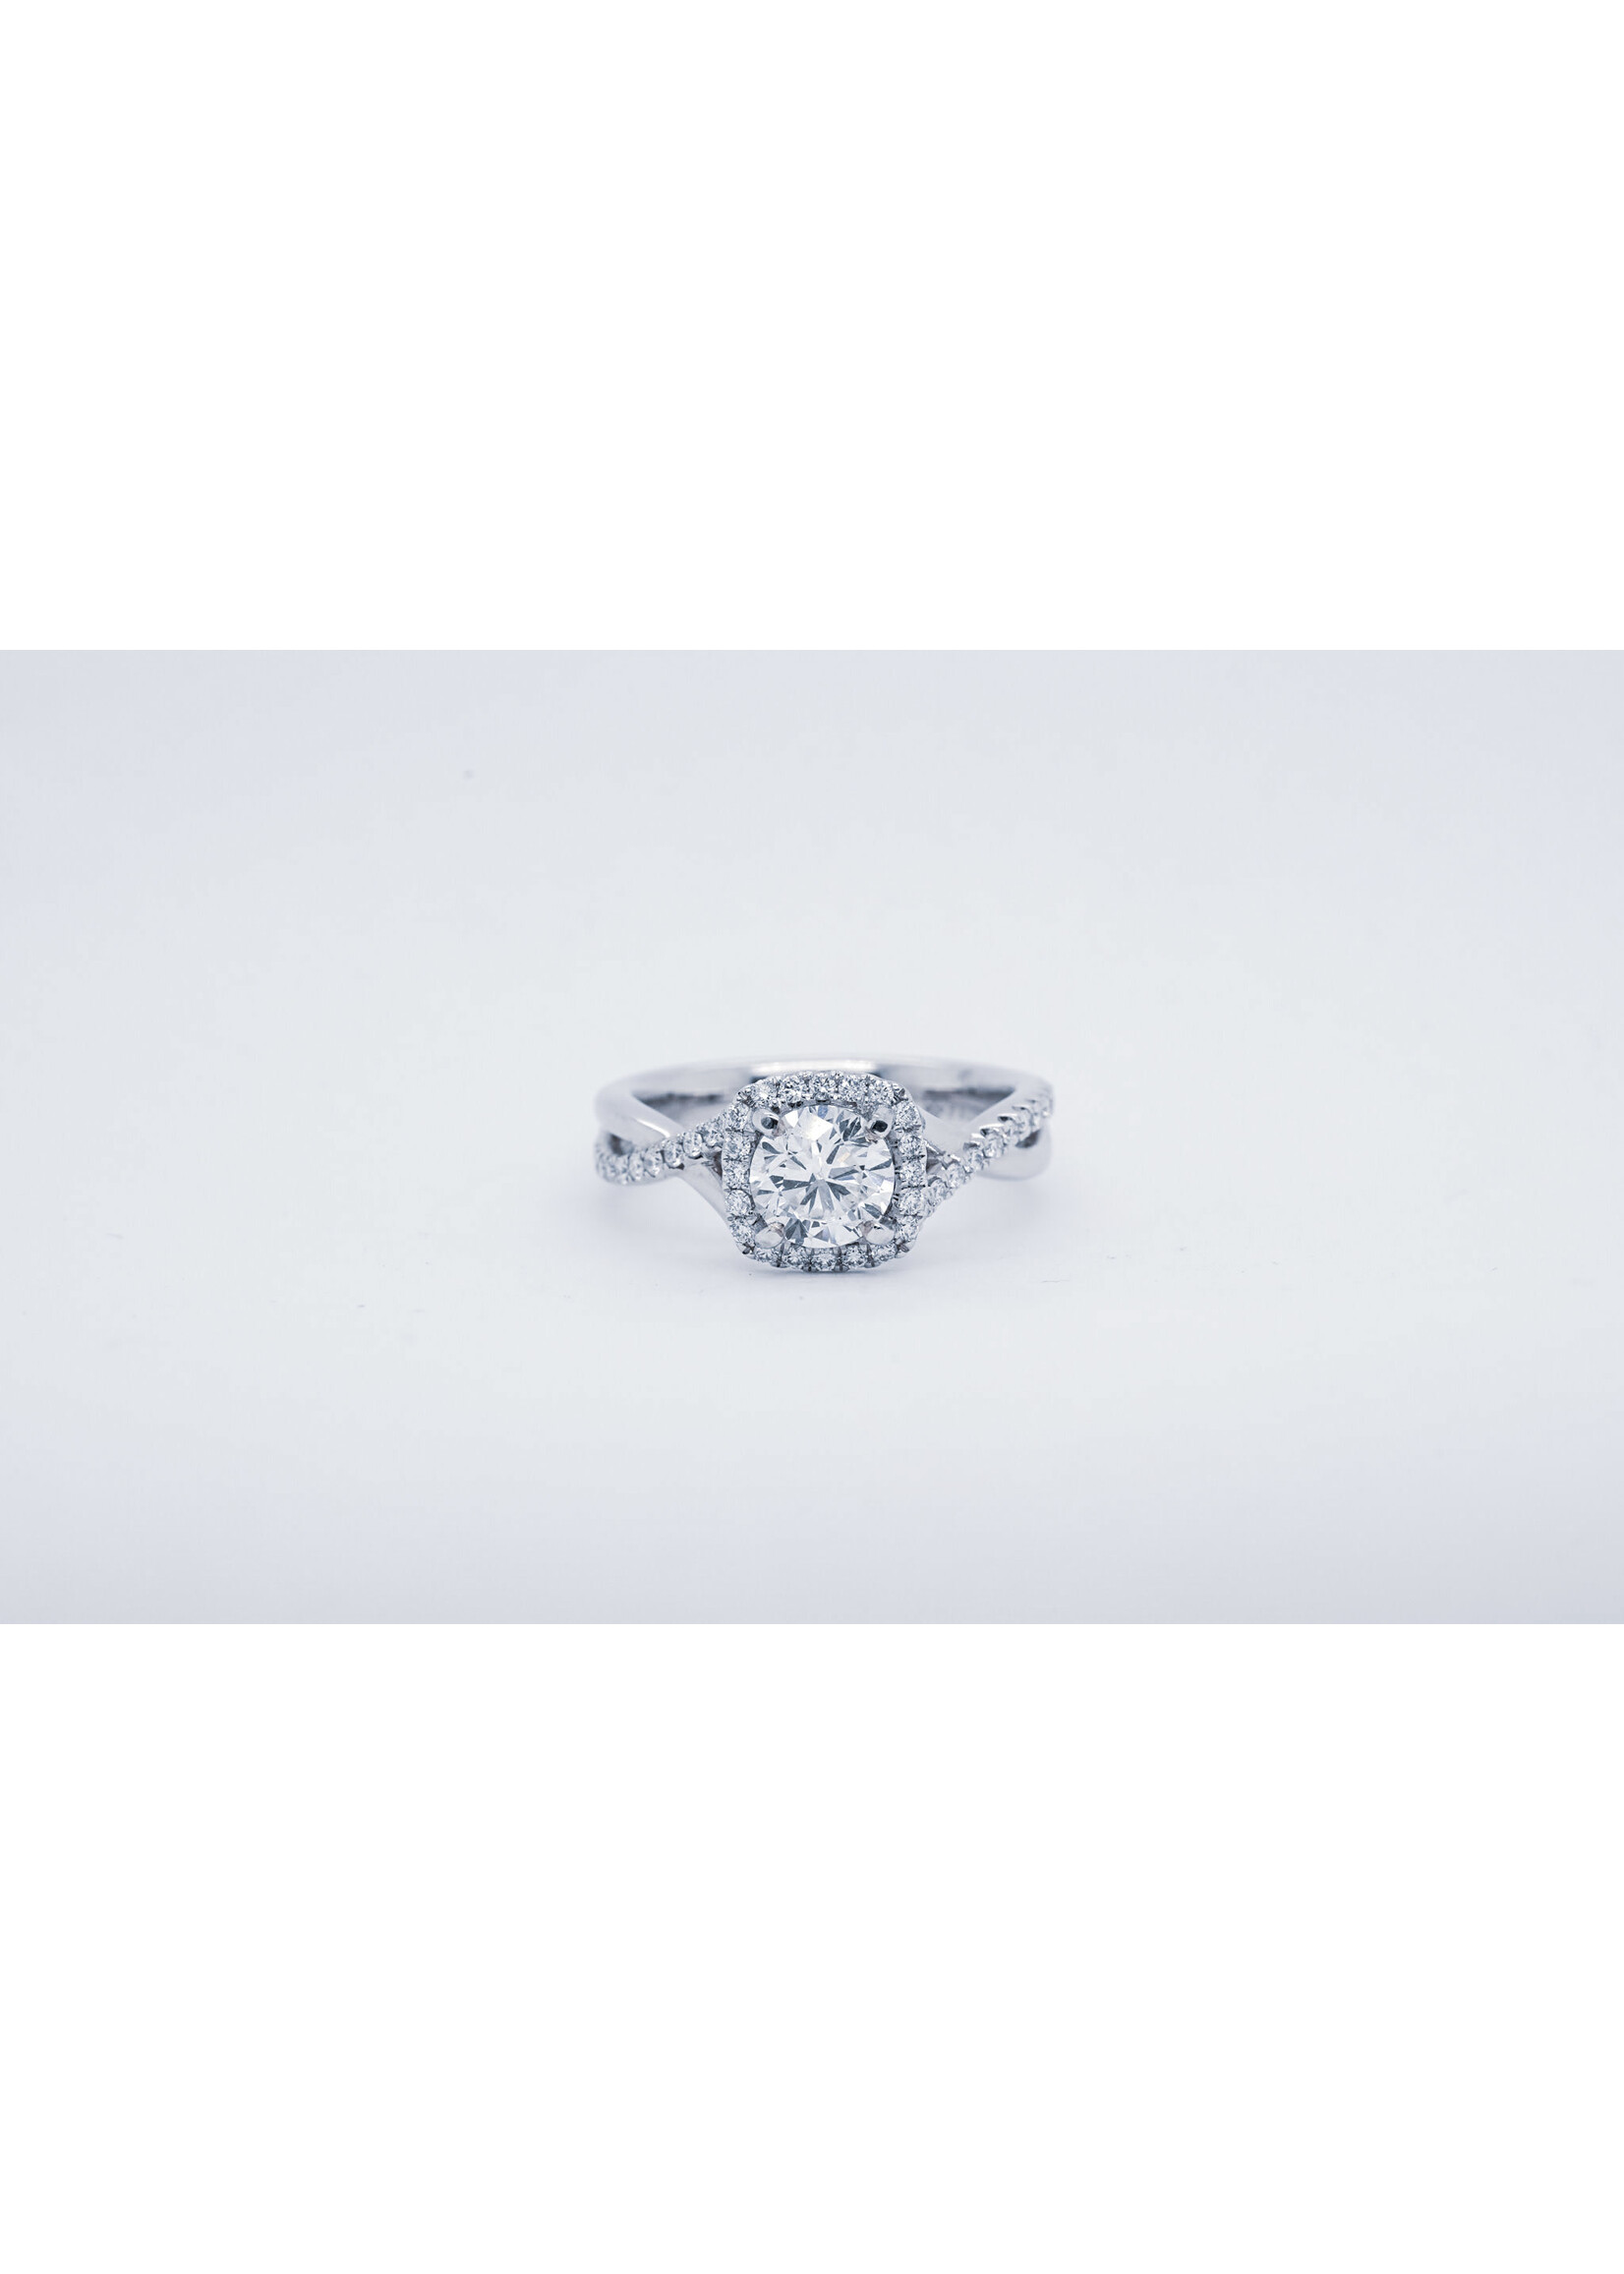 14KW 5.81g 1.41ctw ( 1.01ctr) F/SI2 Round Diamond Halo Engagement Ring (size 6.25)